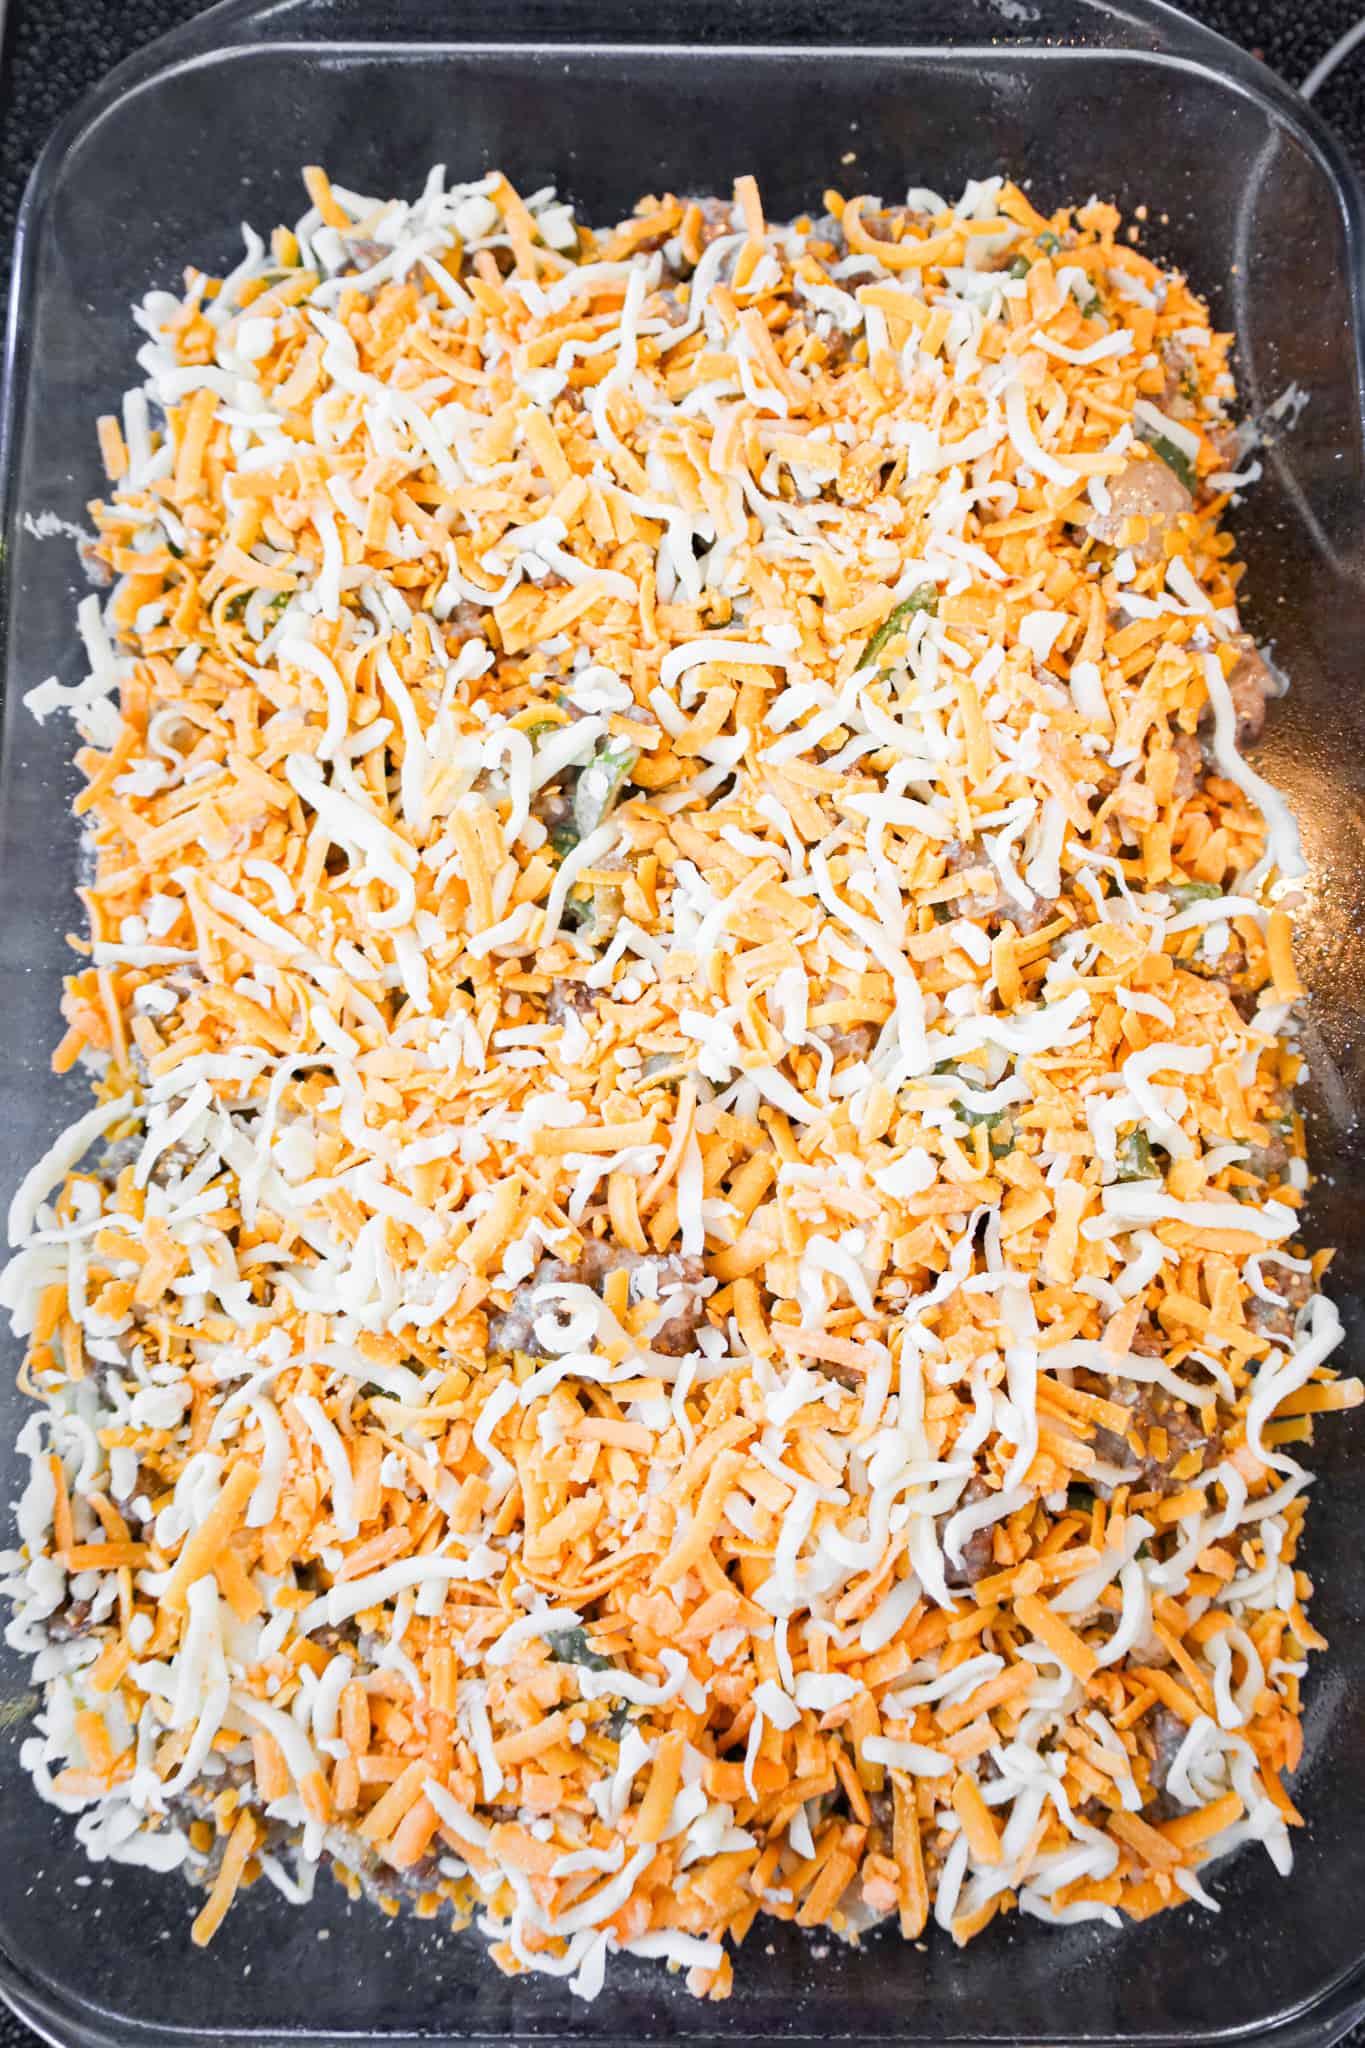 shredded cheese on top of philly cheese steak casserole before baking